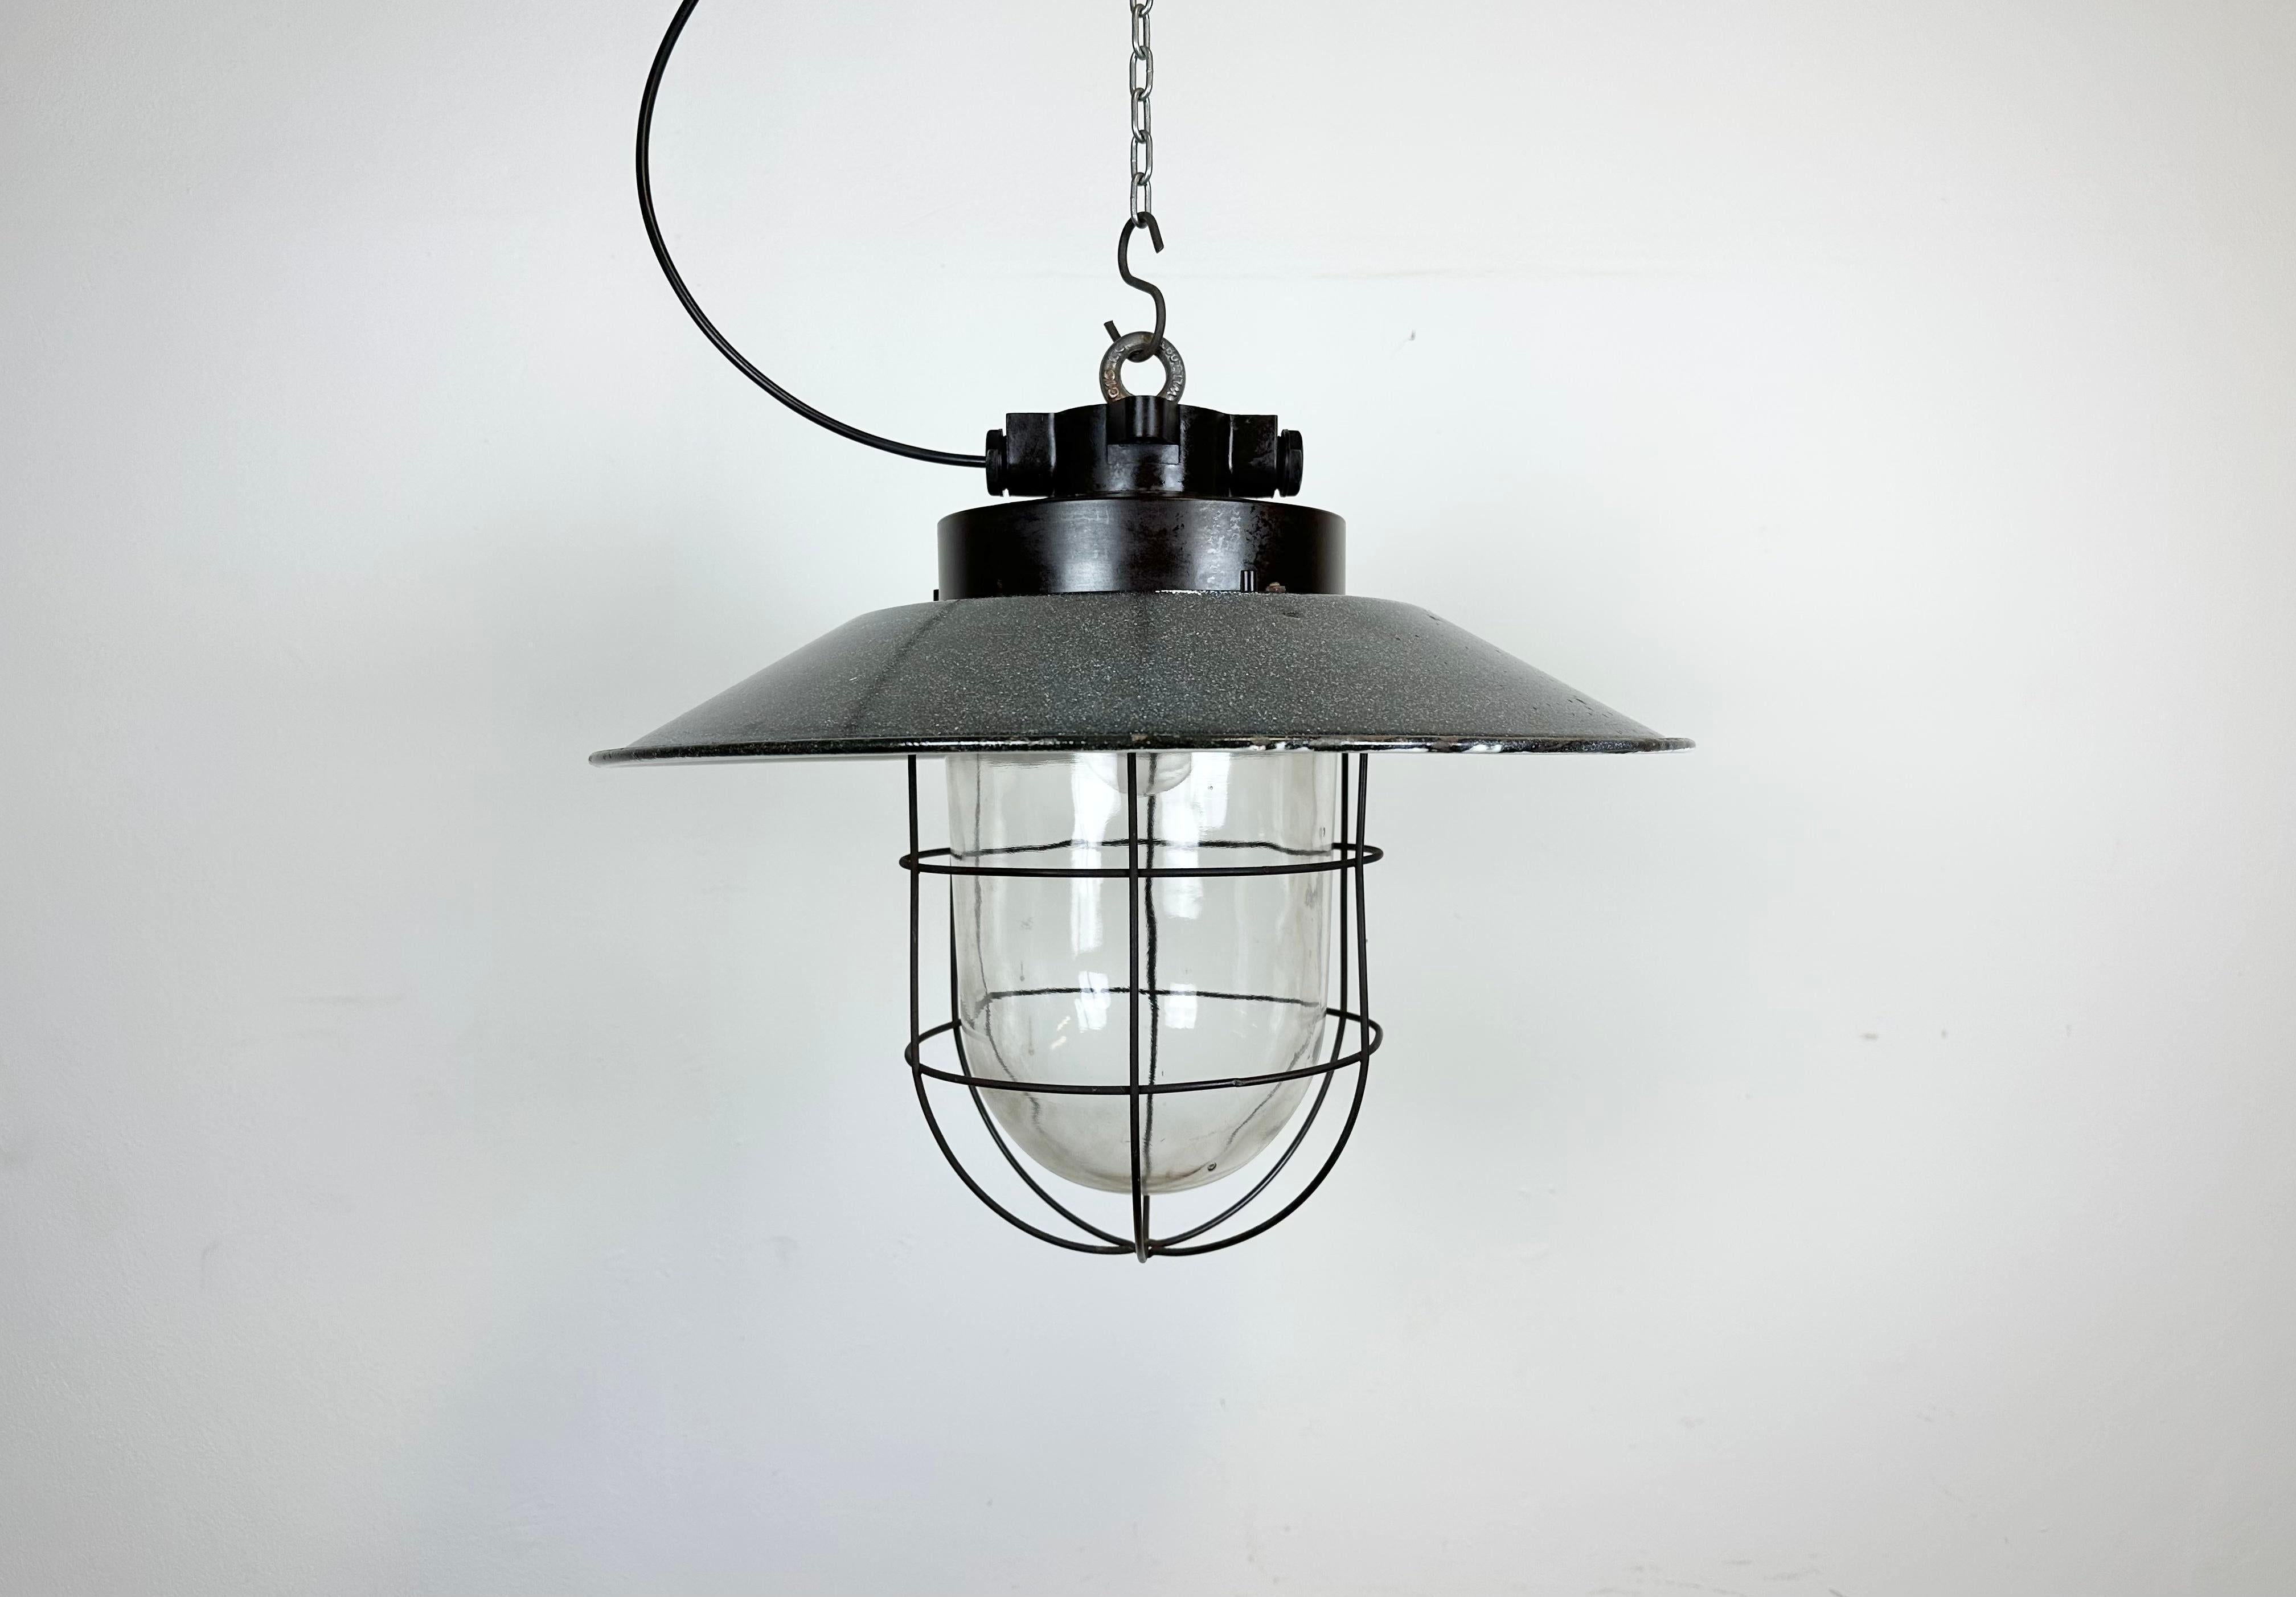 - Vintage industrial light from former Czechoslovakia made during the 1960s
- Grey enamel shade with white interior
- Bakelite top
- Clear glass, iron grid
- Porcelain socket requires E 27/ E26 lightbulbs
- New wire
- Weight: 3.2 kg.
 